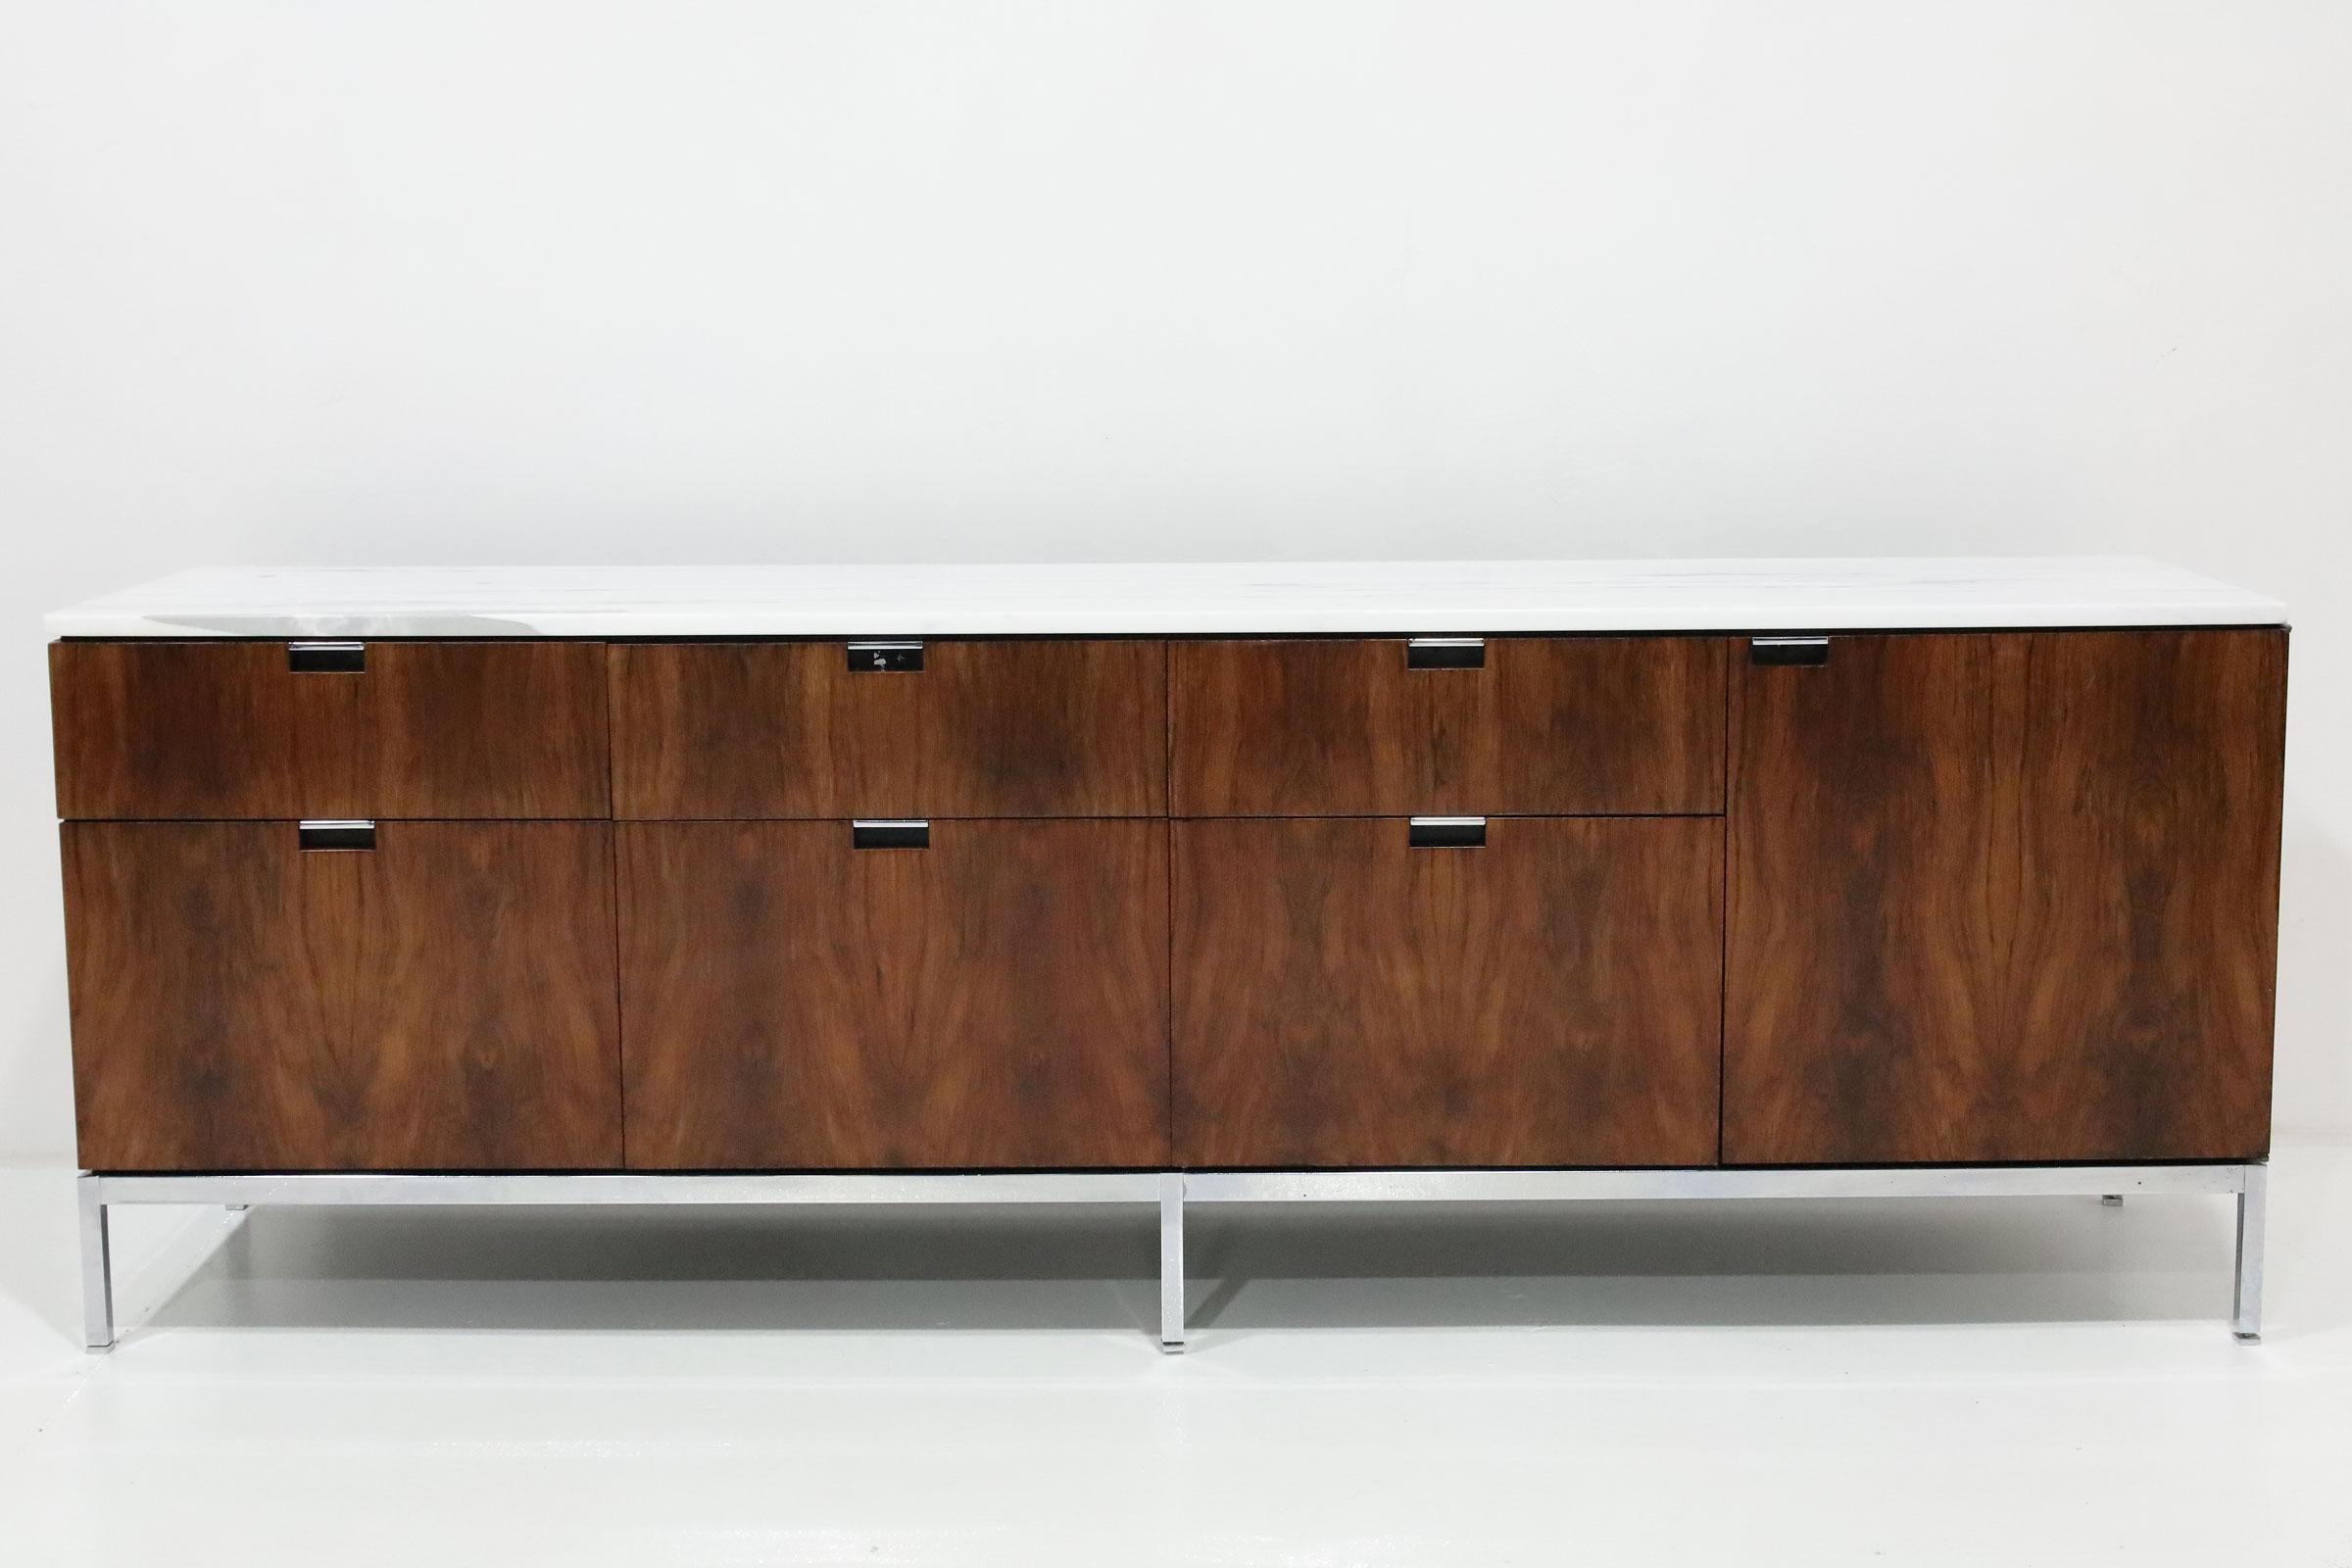 Florence Knoll's iconic sideboard/credenza in rosewood with marble top. The sideboard features 4 bays with internal shelving in one bay and file drawers and smaller drawers in three bays. Locking mechanism not available and keyhole covered to blend